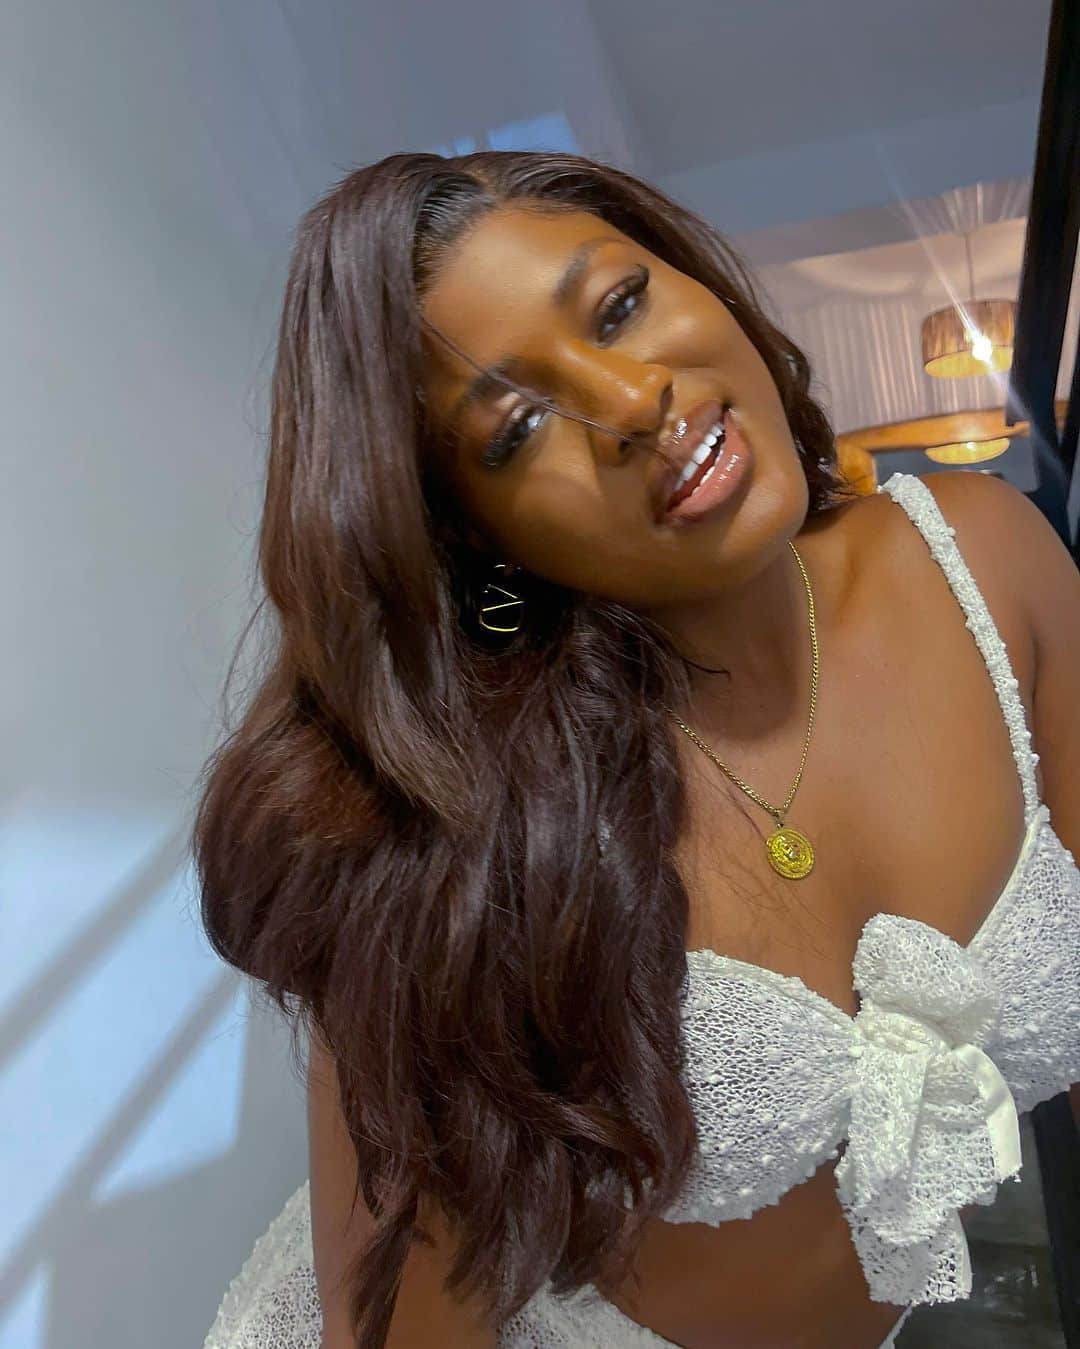 "You can't blame your parents or everyone around you for how you behave" - Alex Unusual slams people who use 'childhood trauma' as excuse for their bad behavior